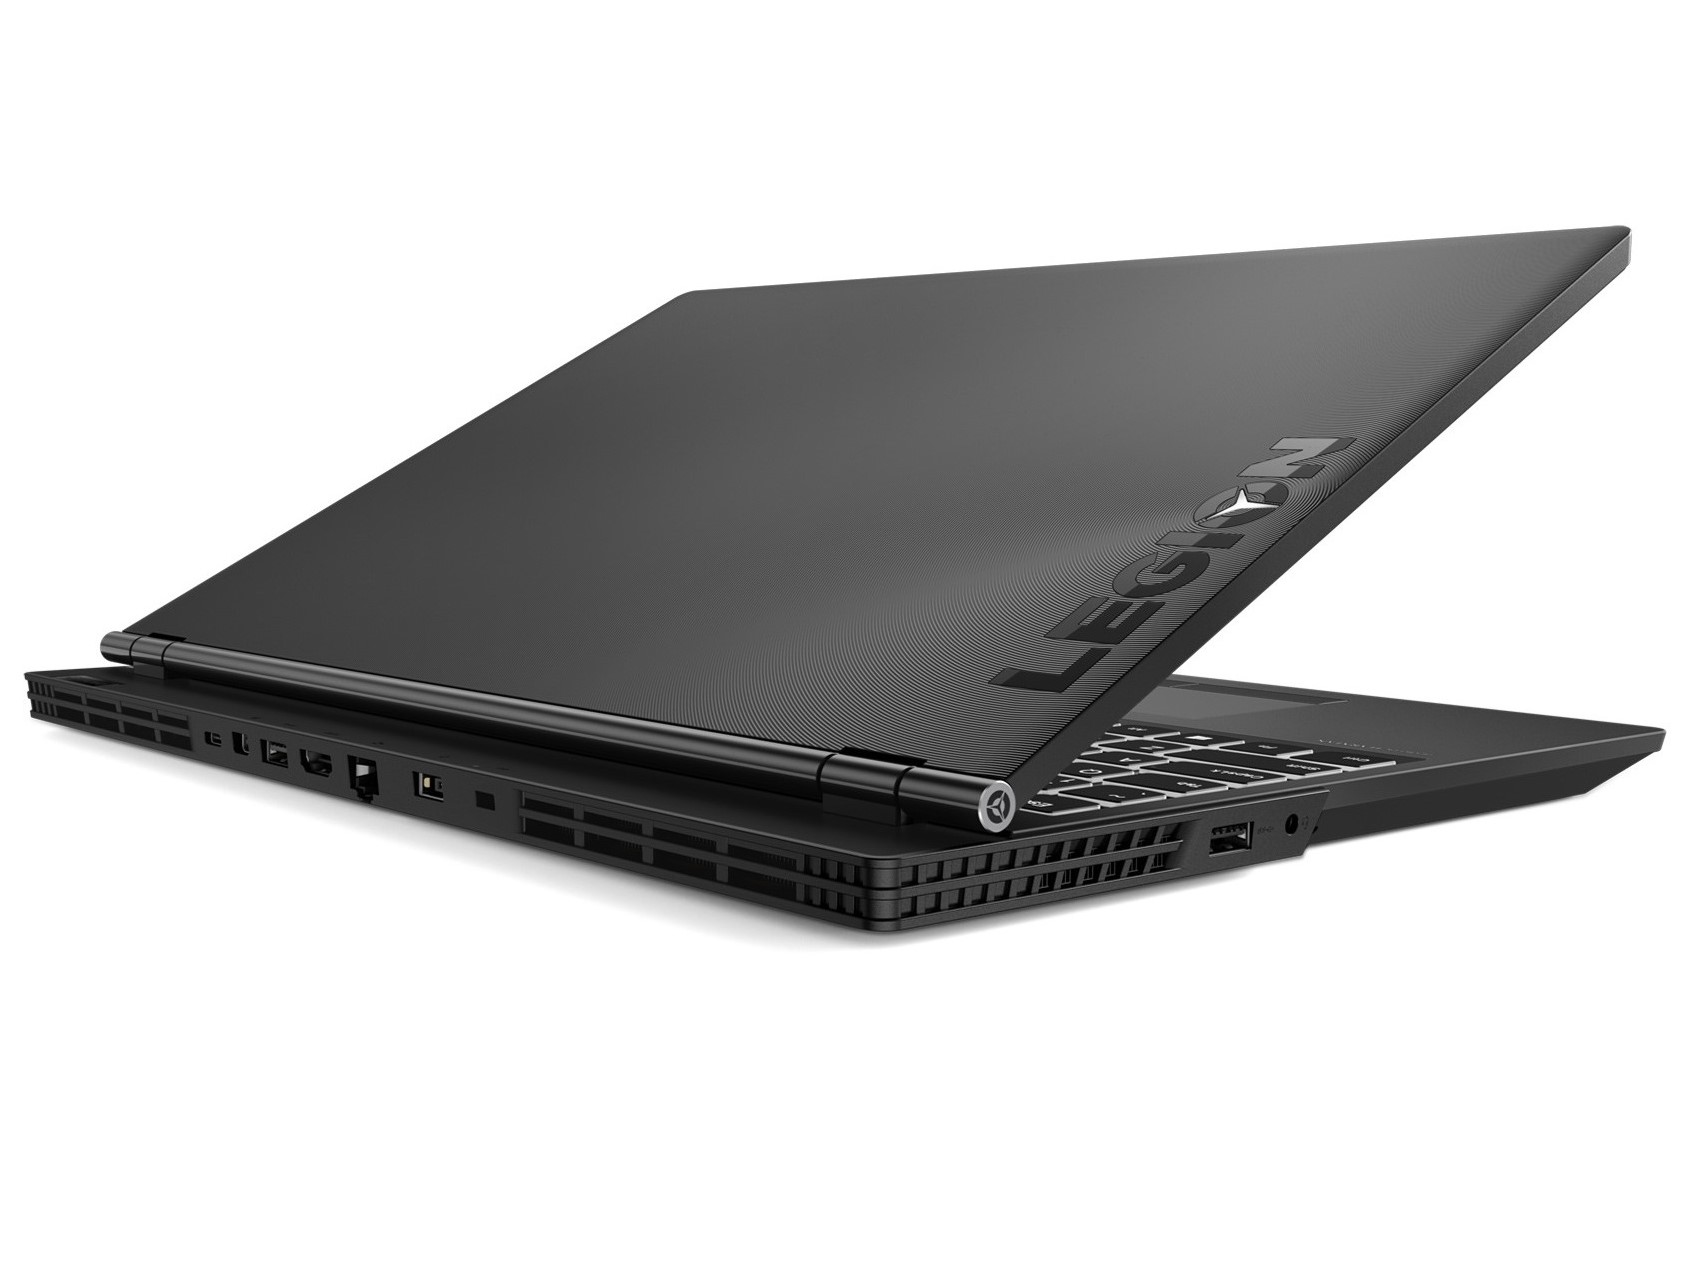 Absorbere skrå ækvator Lenovo Legion Y540-15IRH Laptop Review: A good gaming laptop with a GeForce  GTX 1660 Ti GPU - NotebookCheck.net Reviews